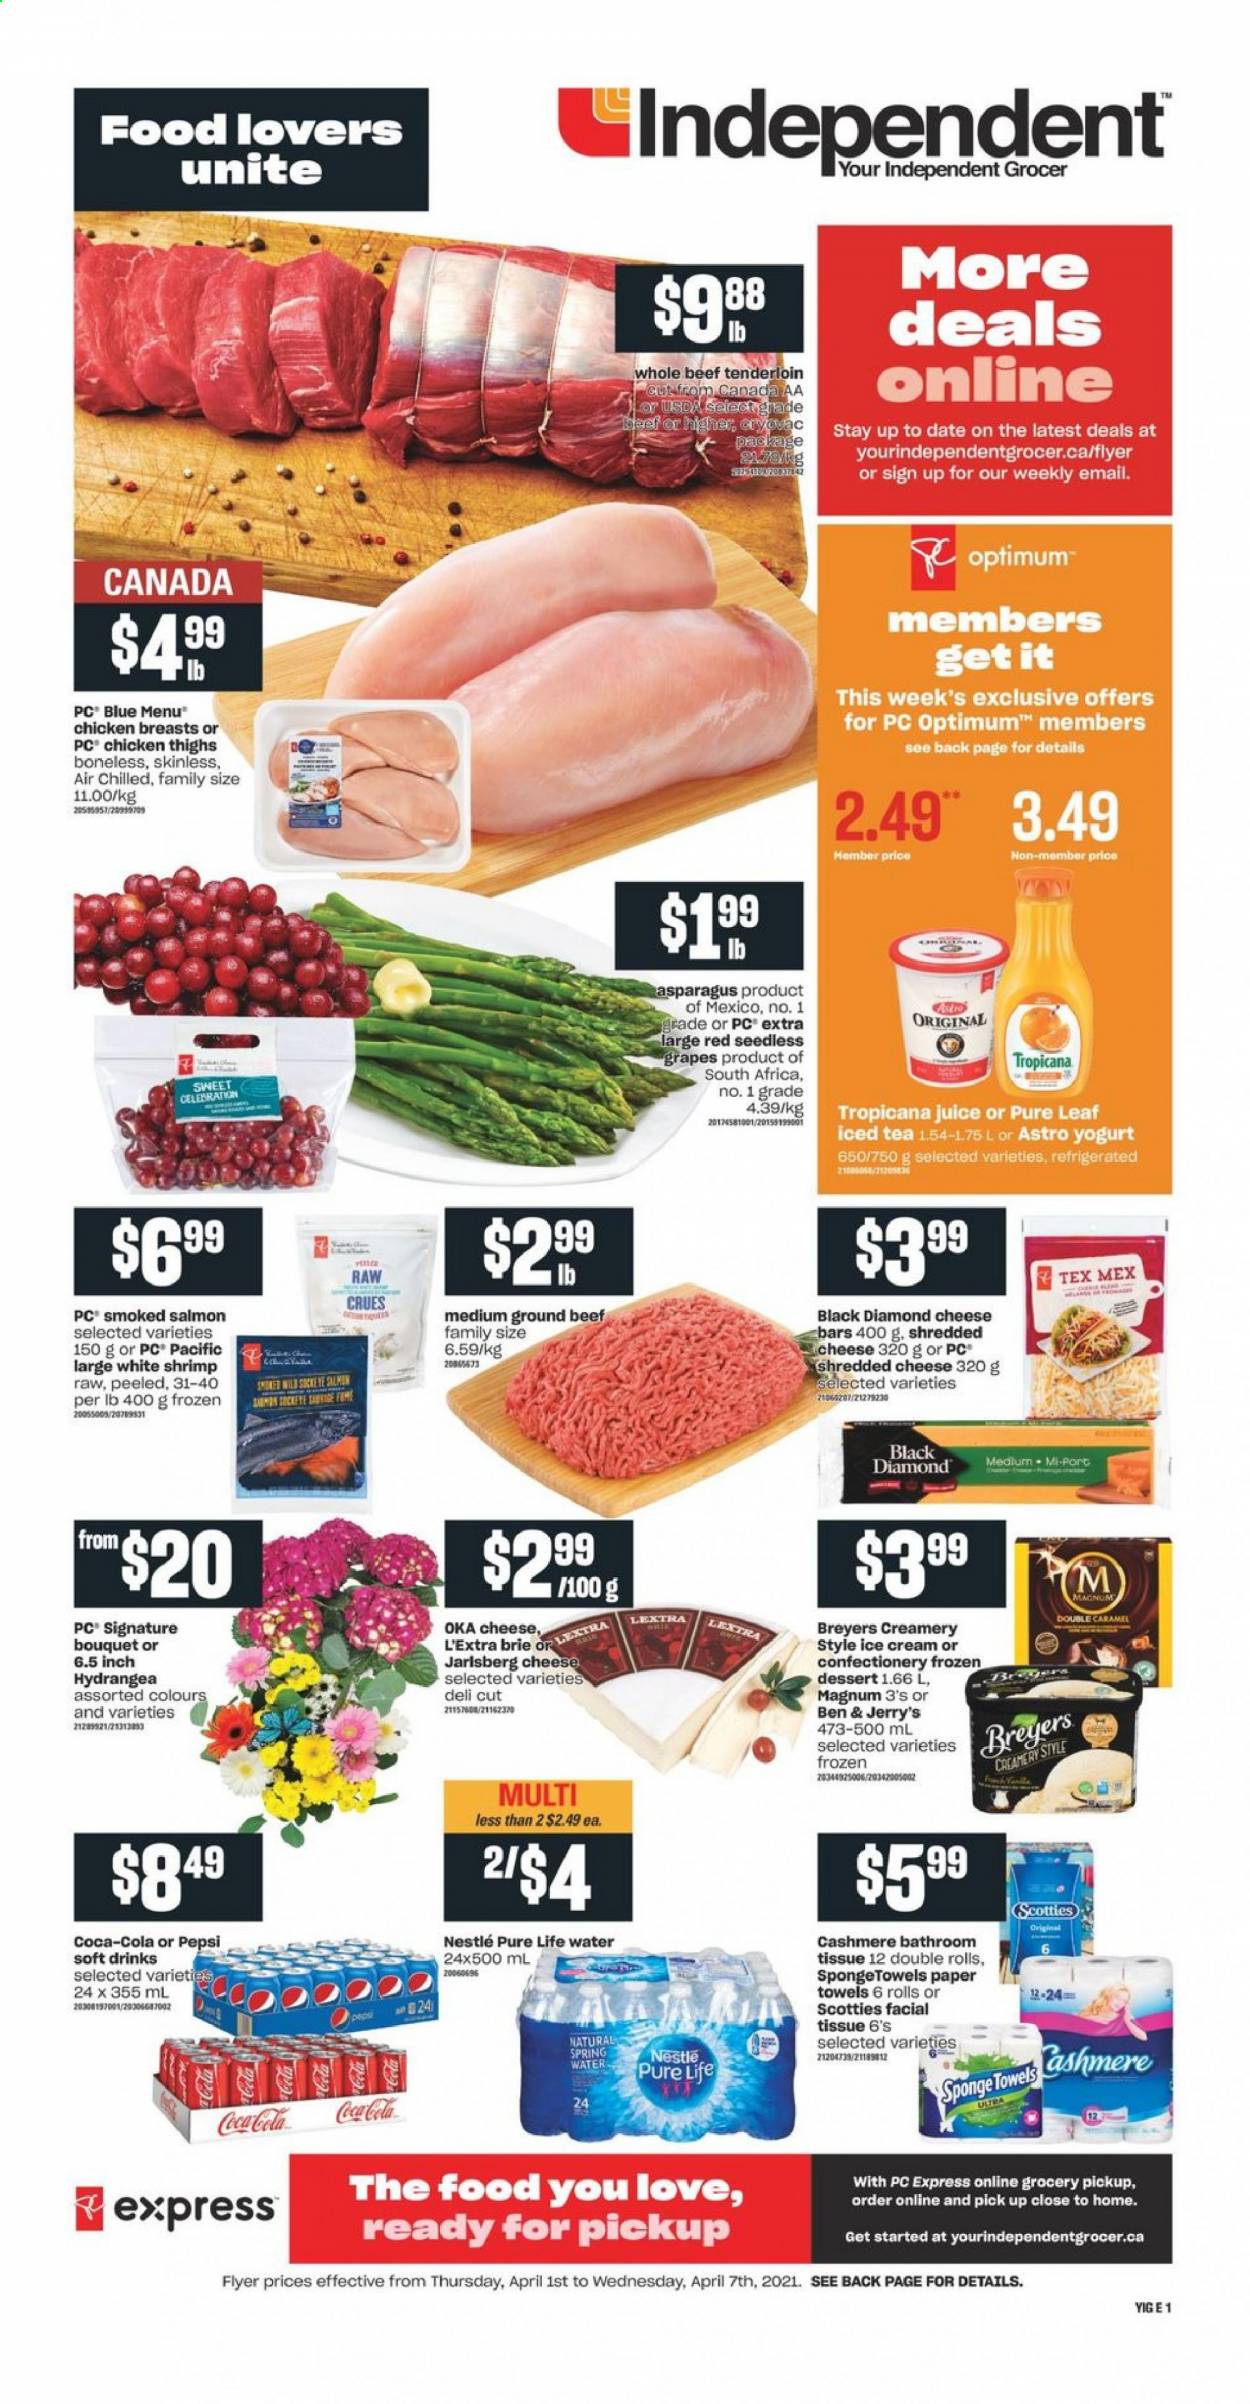 thumbnail - Independent Flyer - April 01, 2021 - April 07, 2021 - Sales products - asparagus, grapes, seedless grapes, salmon, smoked salmon, shrimps, shredded cheese, brie, yoghurt, Magnum, ice cream, Ben & Jerry's, Celebration, Coca-Cola, Pepsi, juice, ice tea, soft drink, spring water, Pure Life Water, Pure Leaf, chicken breasts, chicken thighs, chicken, beef meat, ground beef, beef tenderloin, bath tissue, kitchen towels, paper towels, sponge, Optimum, Nestlé. Page 1.